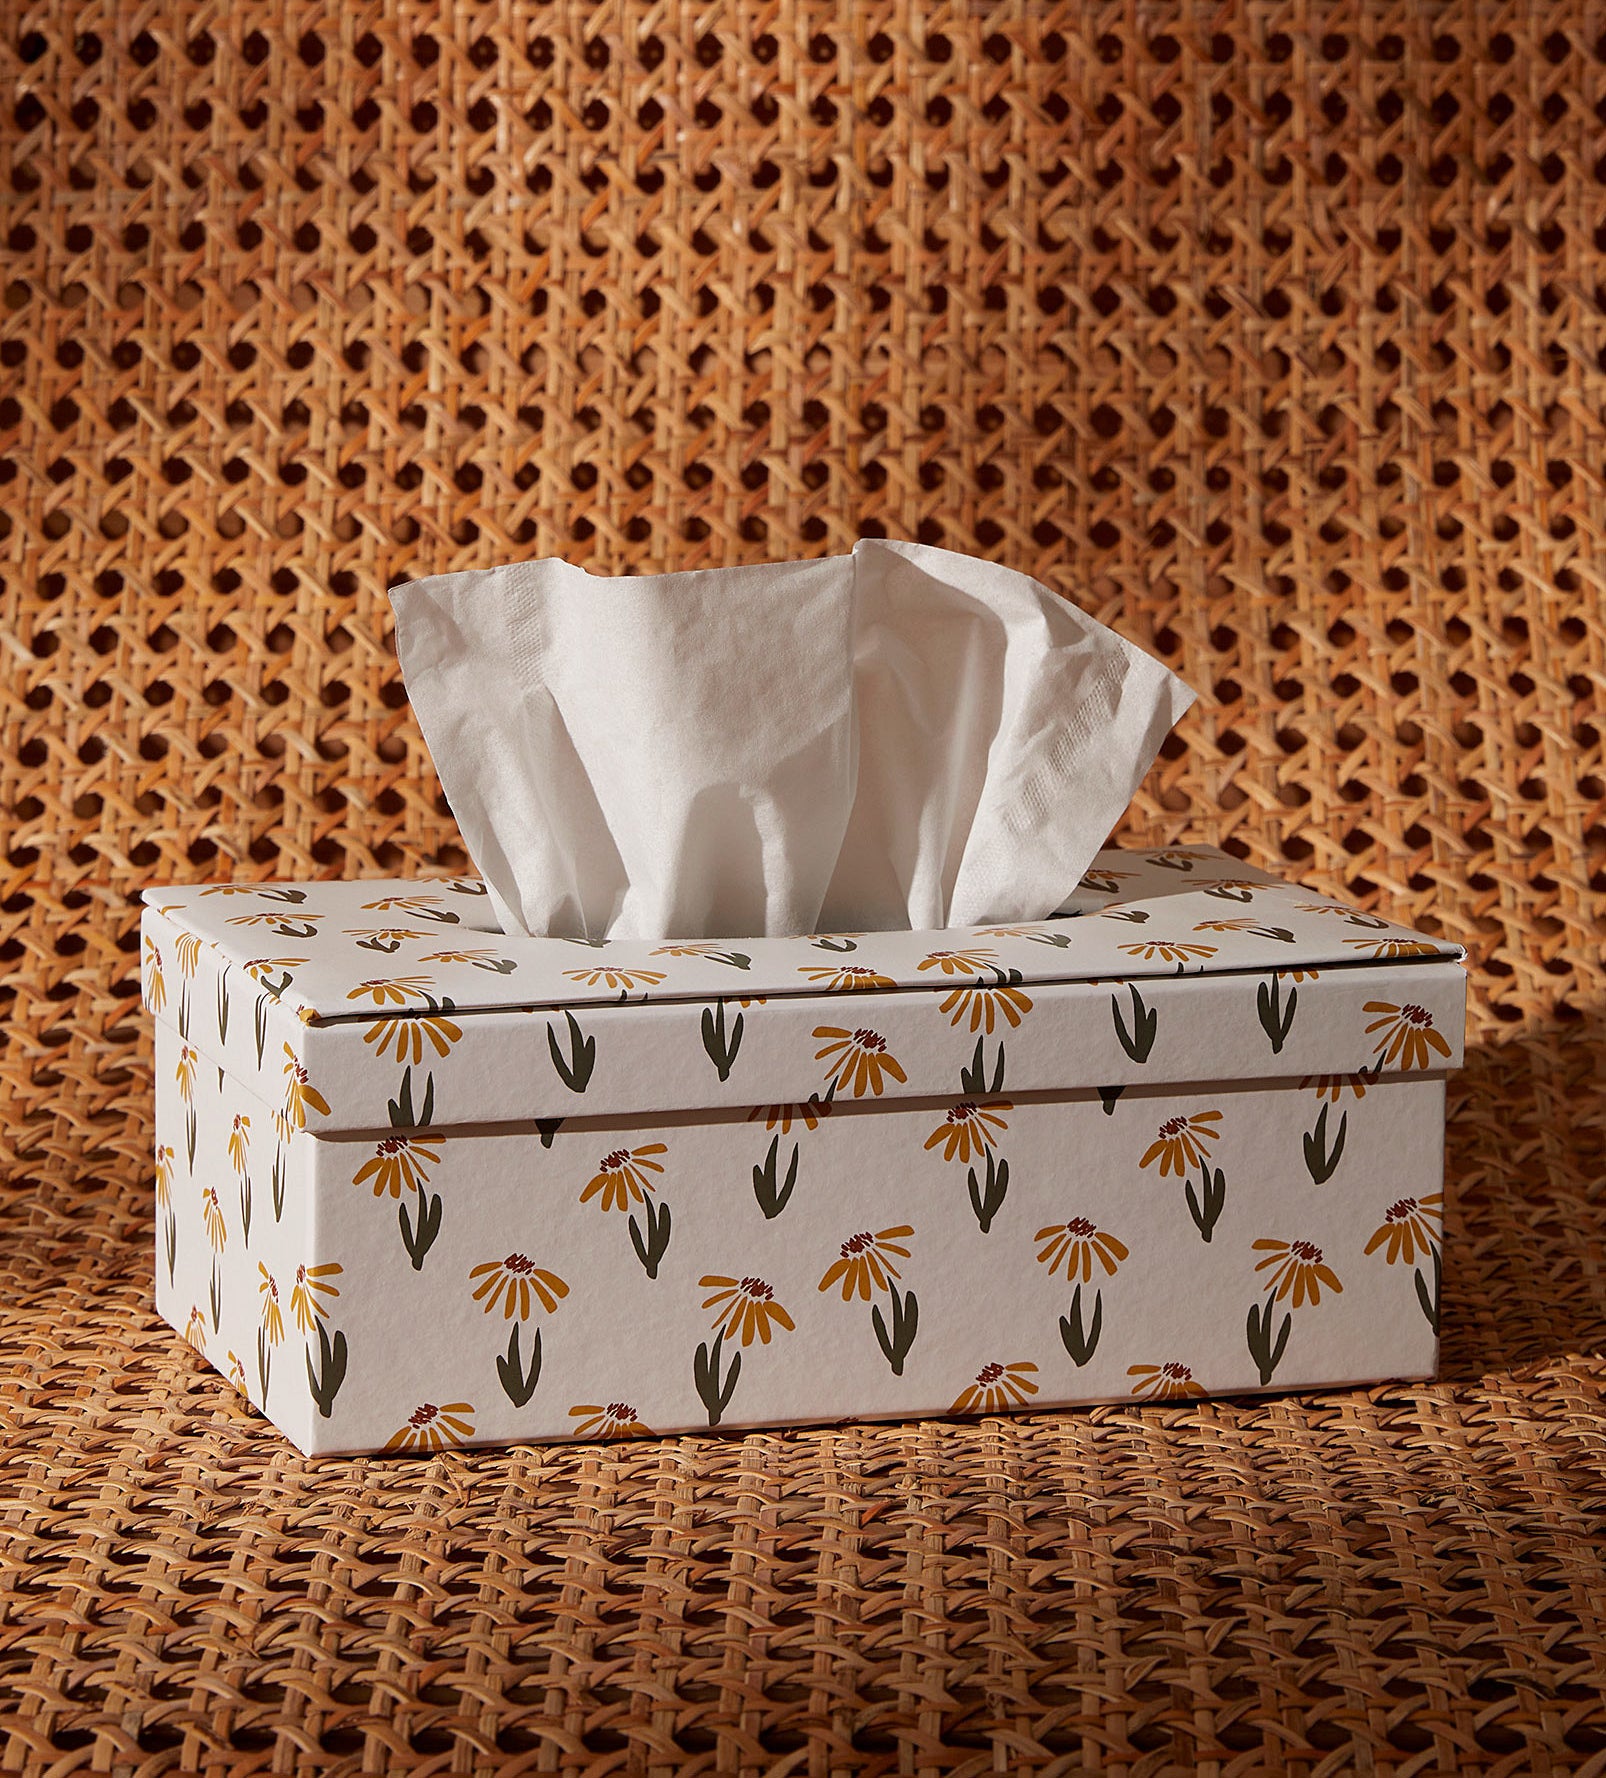 a floral tissue box holder on a rattan surface